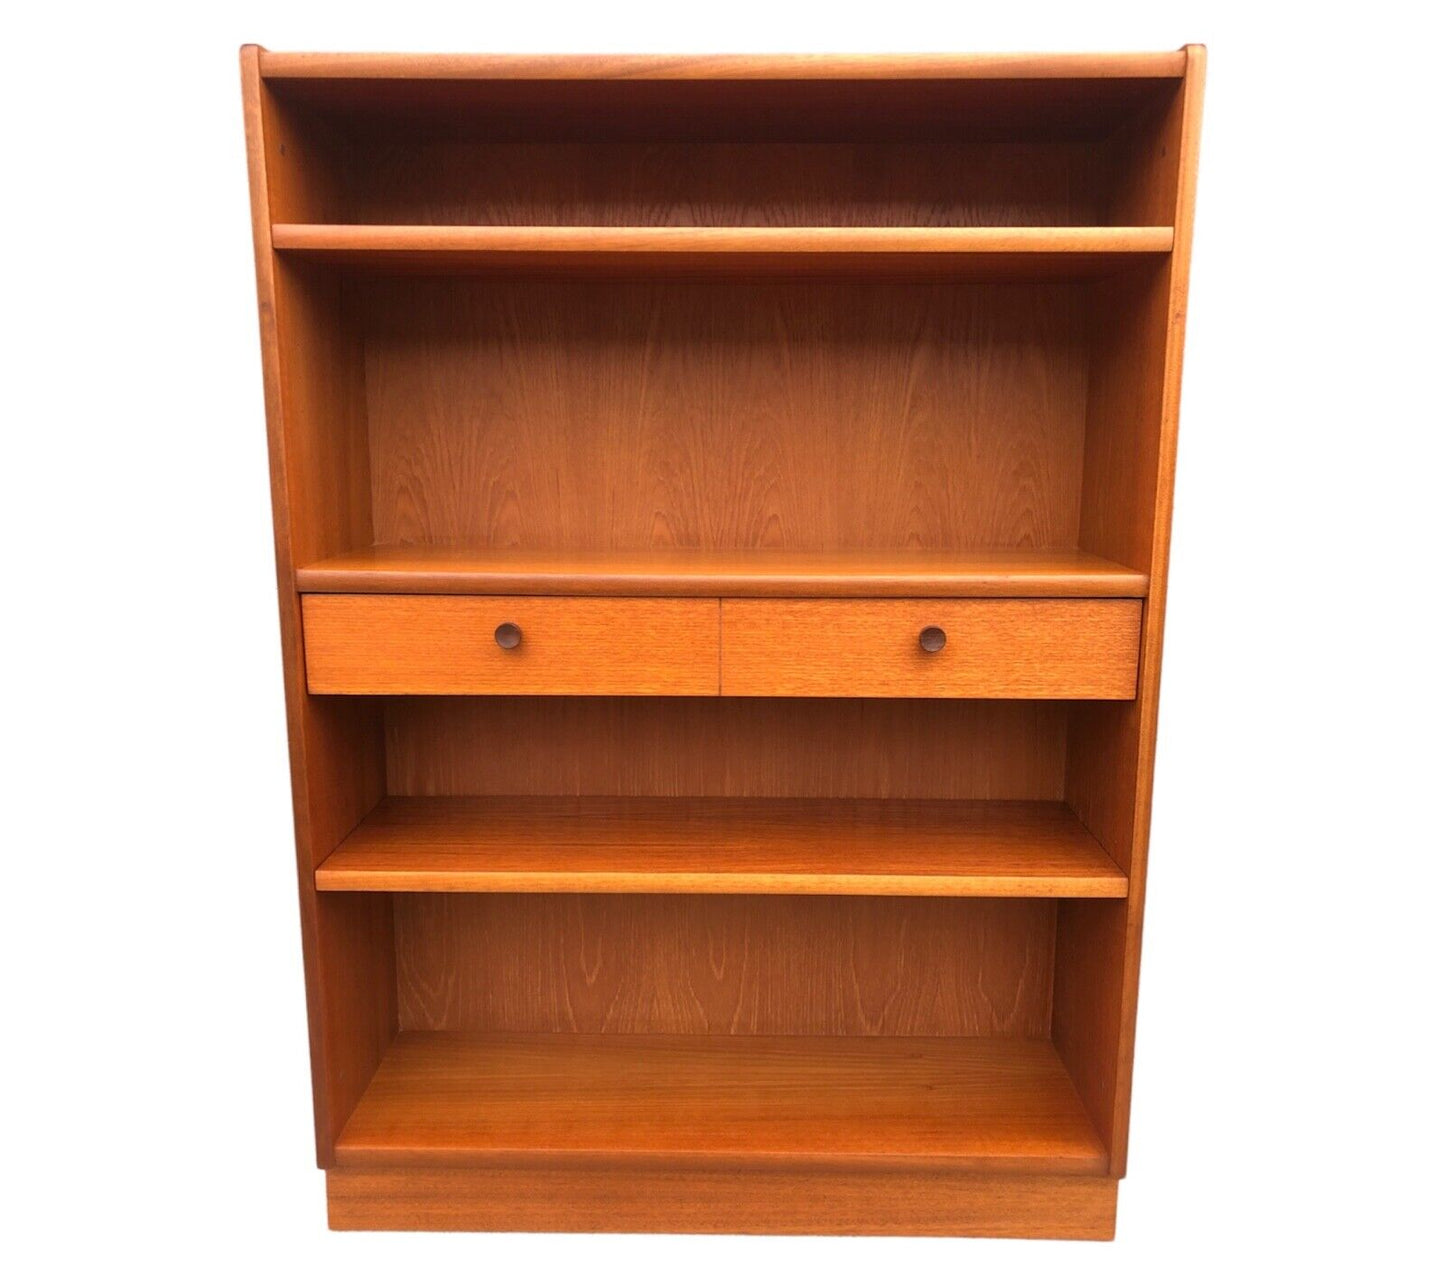 000915....Handsome Retro Teak Bookcase By Nathan / Mid Century Bookcase ( sold )